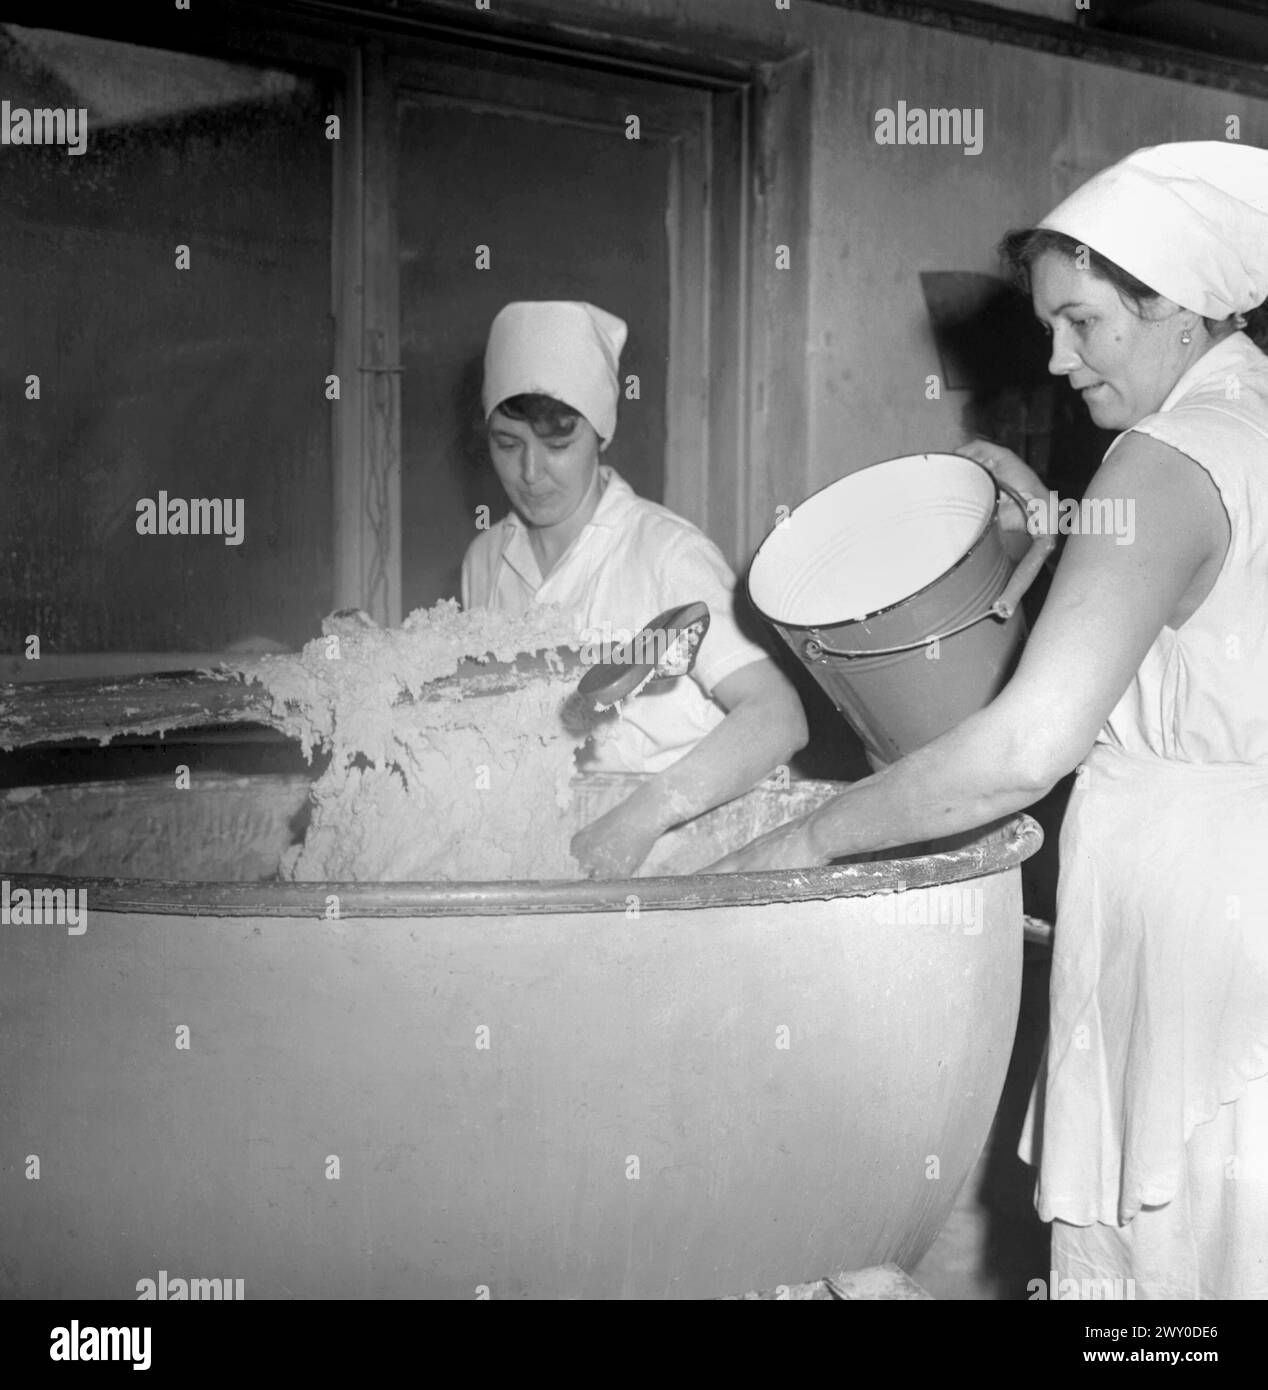 Socialist Republic of Romania in the 1970s. Workers in a state owned bread making factory. Stock Photo